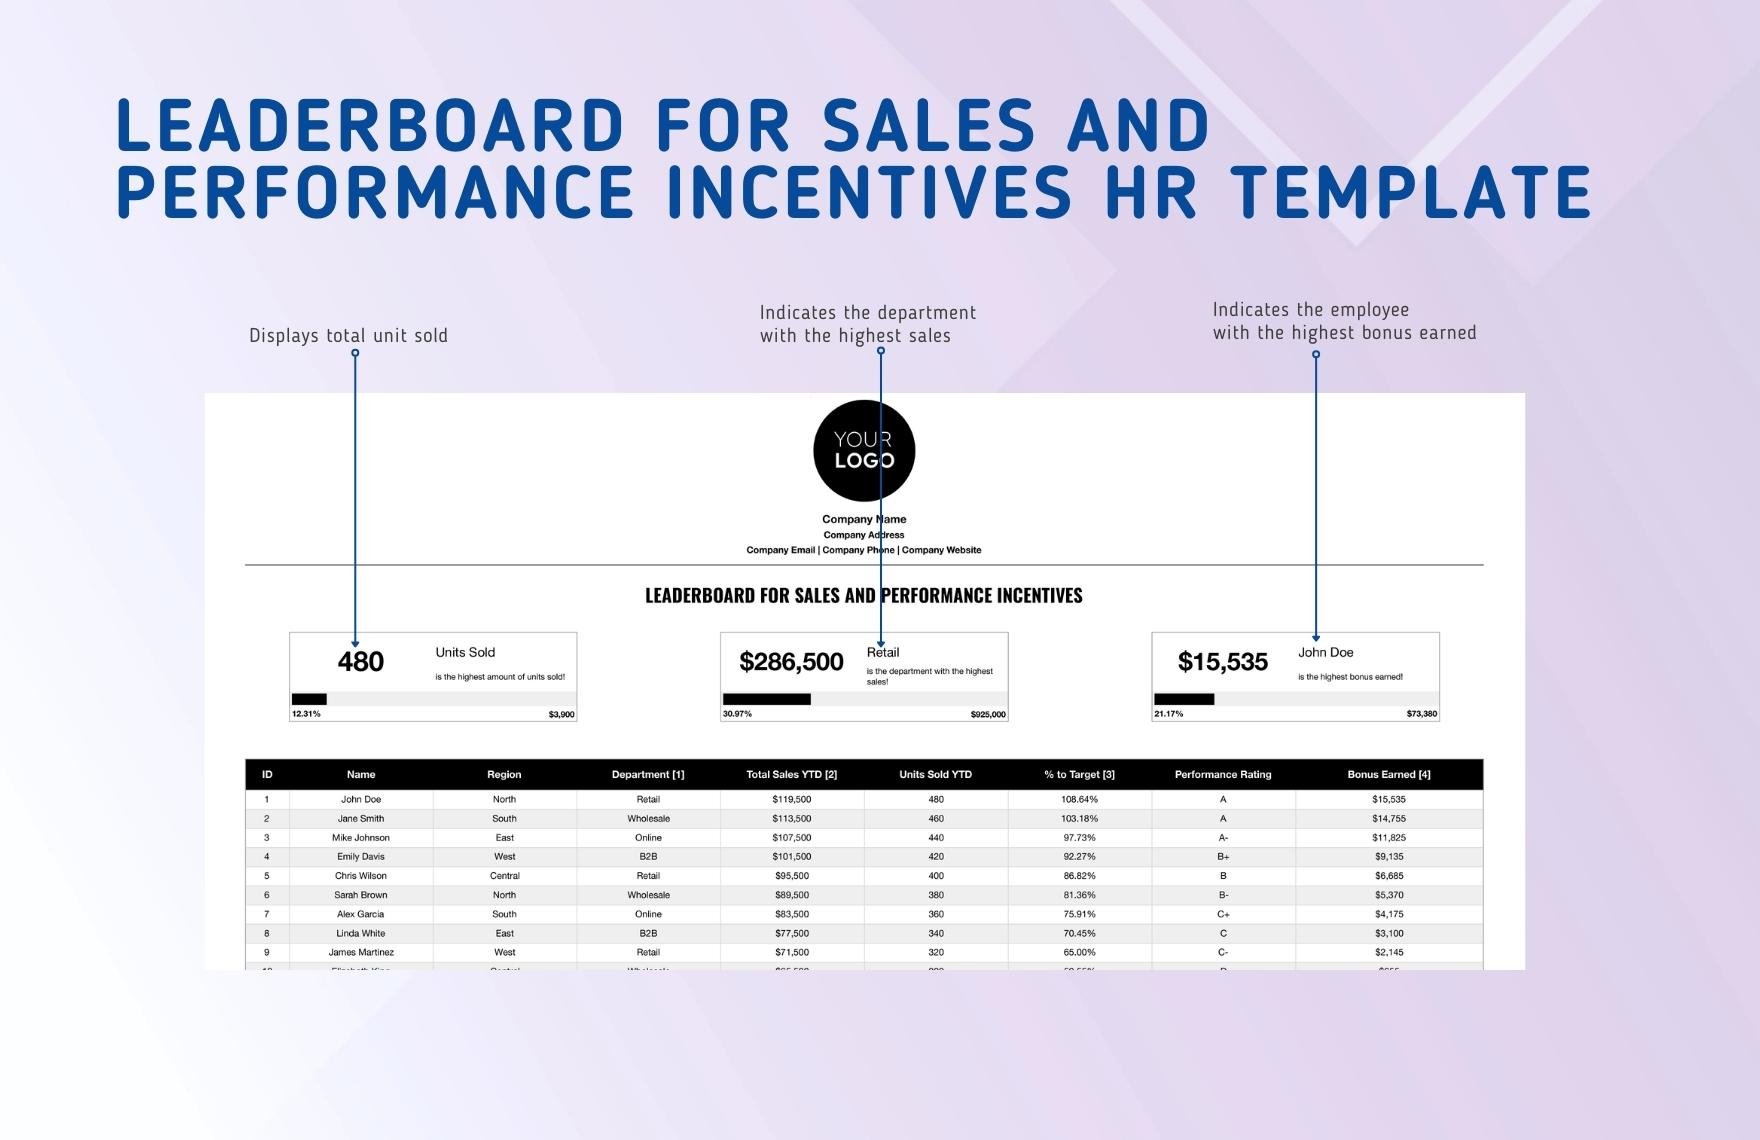 Leaderboard for Sales and Performance Incentives HR Template